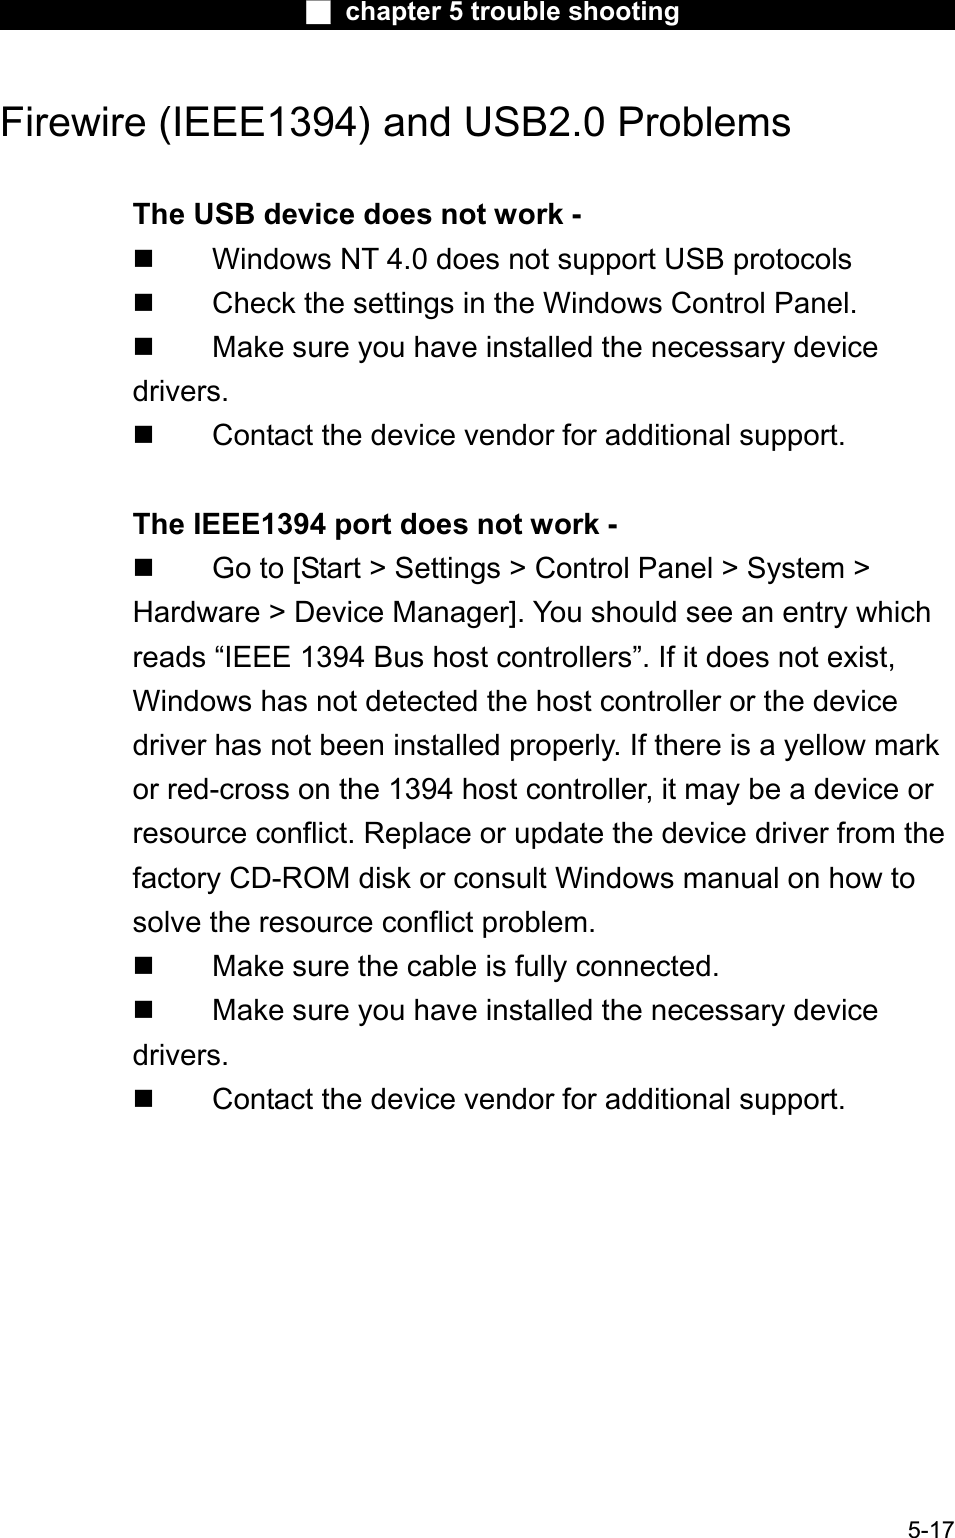 Ϯ chapter 5 trouble shootingFirewire (IEEE1394) and USB2.0 Problems The USB device does not work -  Windows NT 4.0 does not support USB protocols Check the settings in the Windows Control Panel.  Make sure you have installed the necessary devicedrivers. Contact the device vendor for additional support.The IEEE1394 port does not work -  Go to [Start &gt; Settings &gt; Control Panel &gt; System &gt;Hardware &gt; Device Manager]. You should see an entry which reads “IEEE 1394 Bus host controllers”. If it does not exist,Windows has not detected the host controller or the devicedriver has not been installed properly. If there is a yellow markor red-cross on the 1394 host controller, it may be a device or resource conflict. Replace or update the device driver from the factory CD-ROM disk or consult Windows manual on how to solve the resource conflict problem. Make sure the cable is fully connected. Make sure you have installed the necessary devicedrivers. Contact the device vendor for additional support.5-17